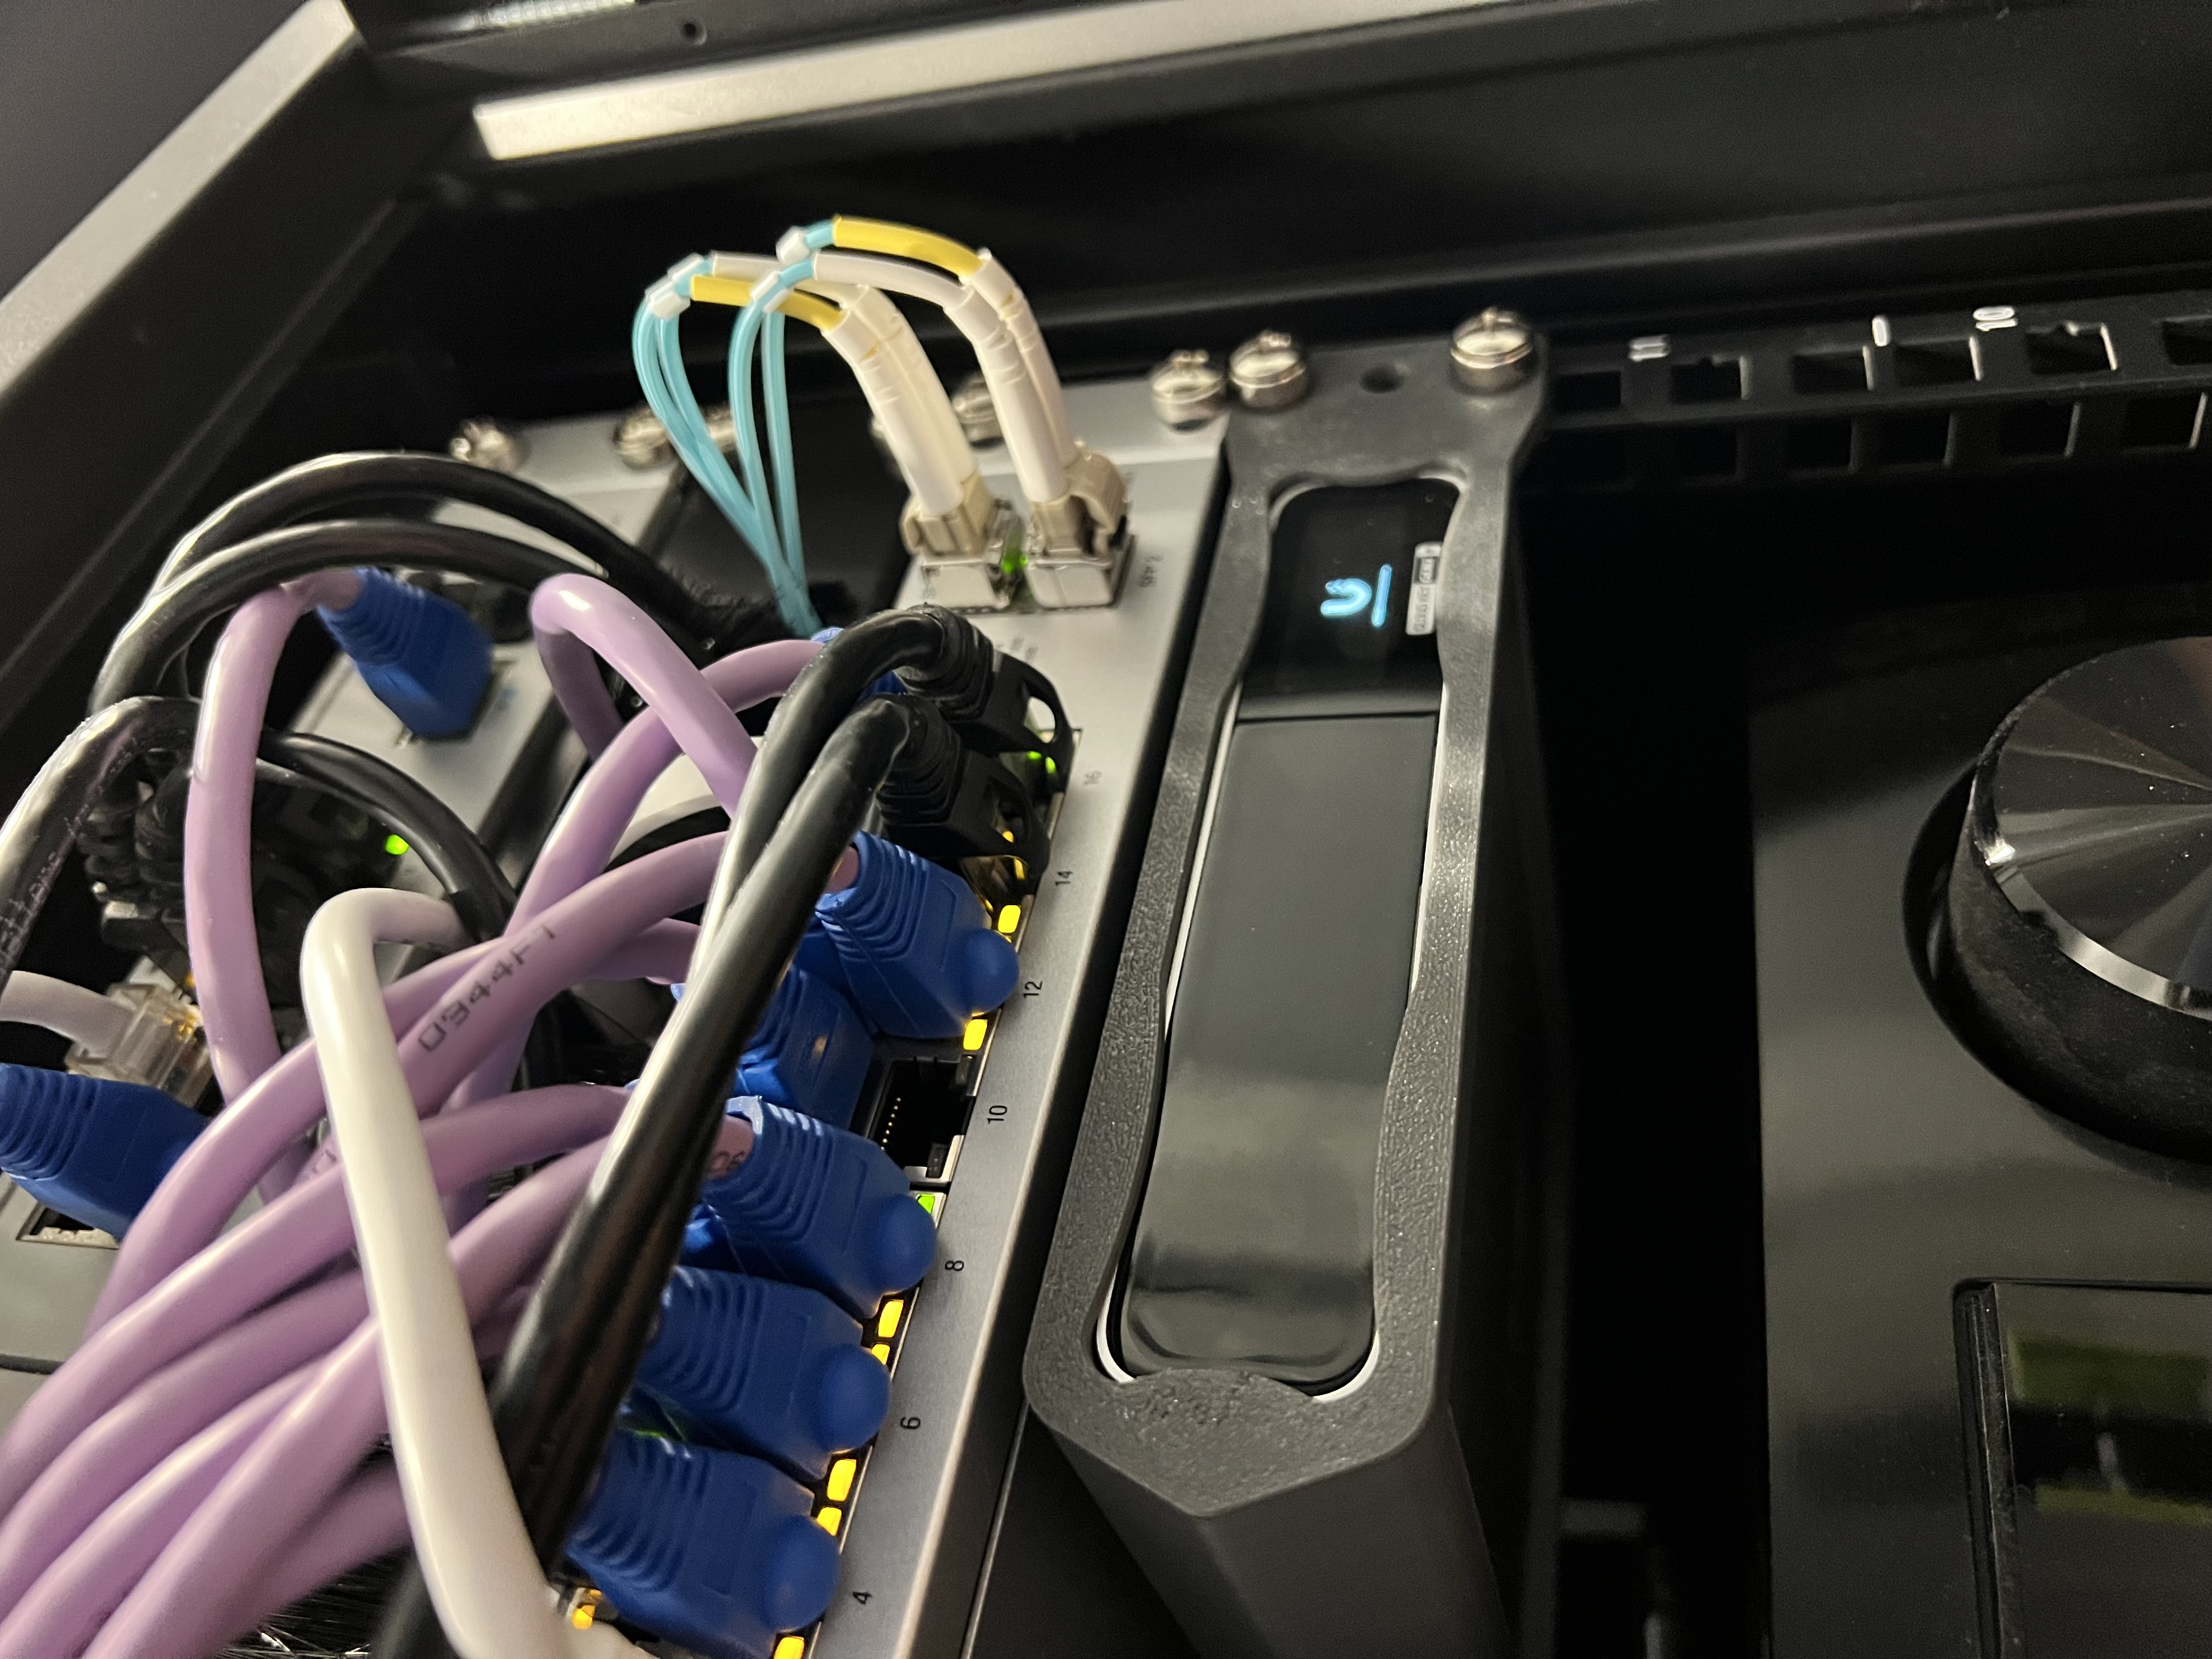 Unit installed in a server rack with a Cloud Key Gen2 installed and powered on